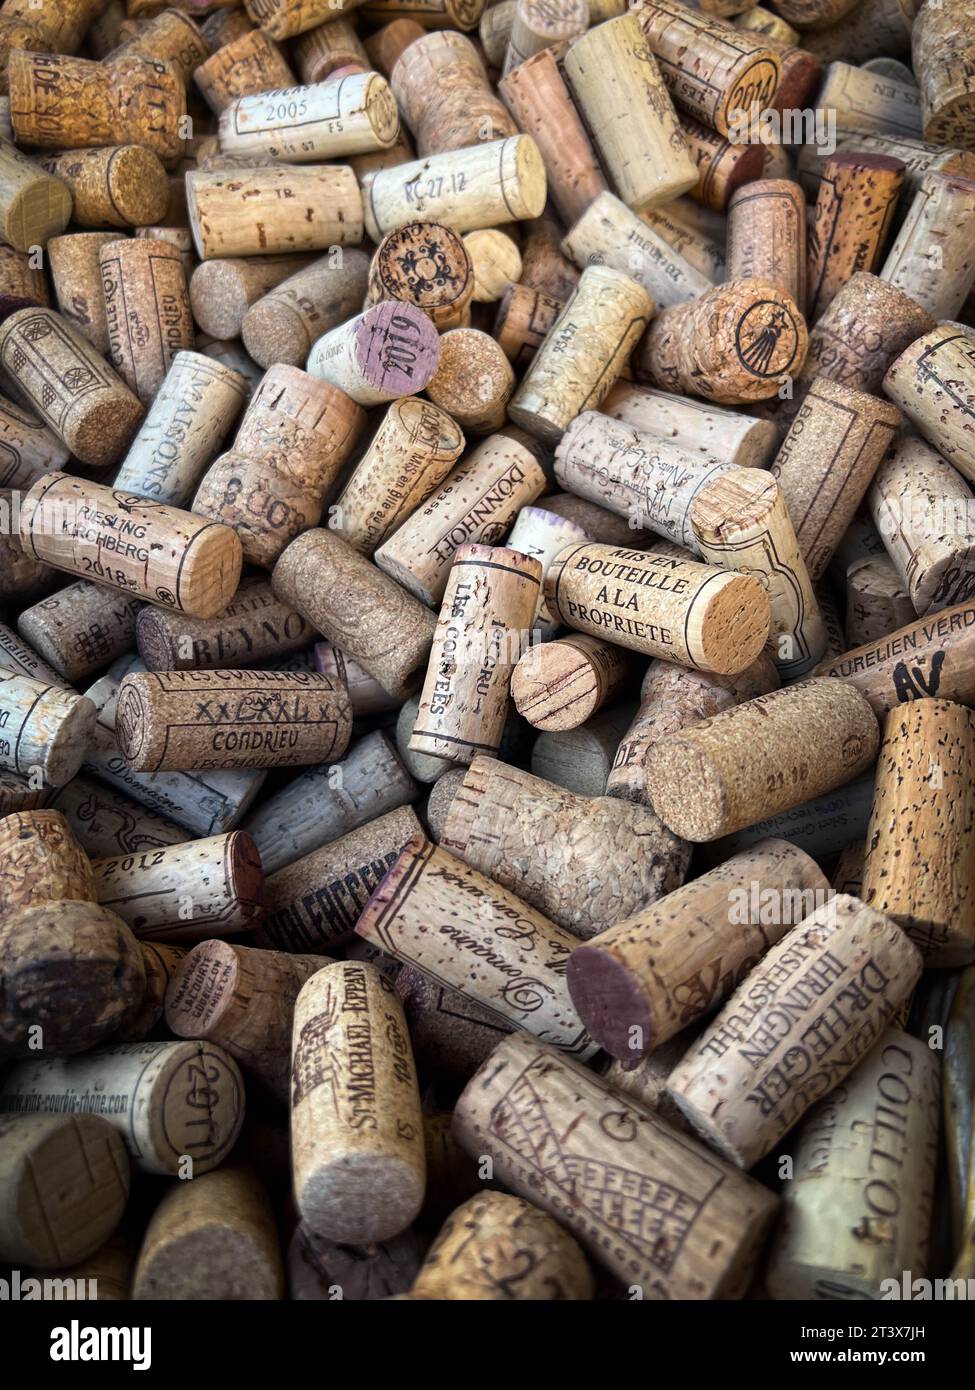 Corks outside a wine store in Beaune, Burgundy, France. Stock Photo